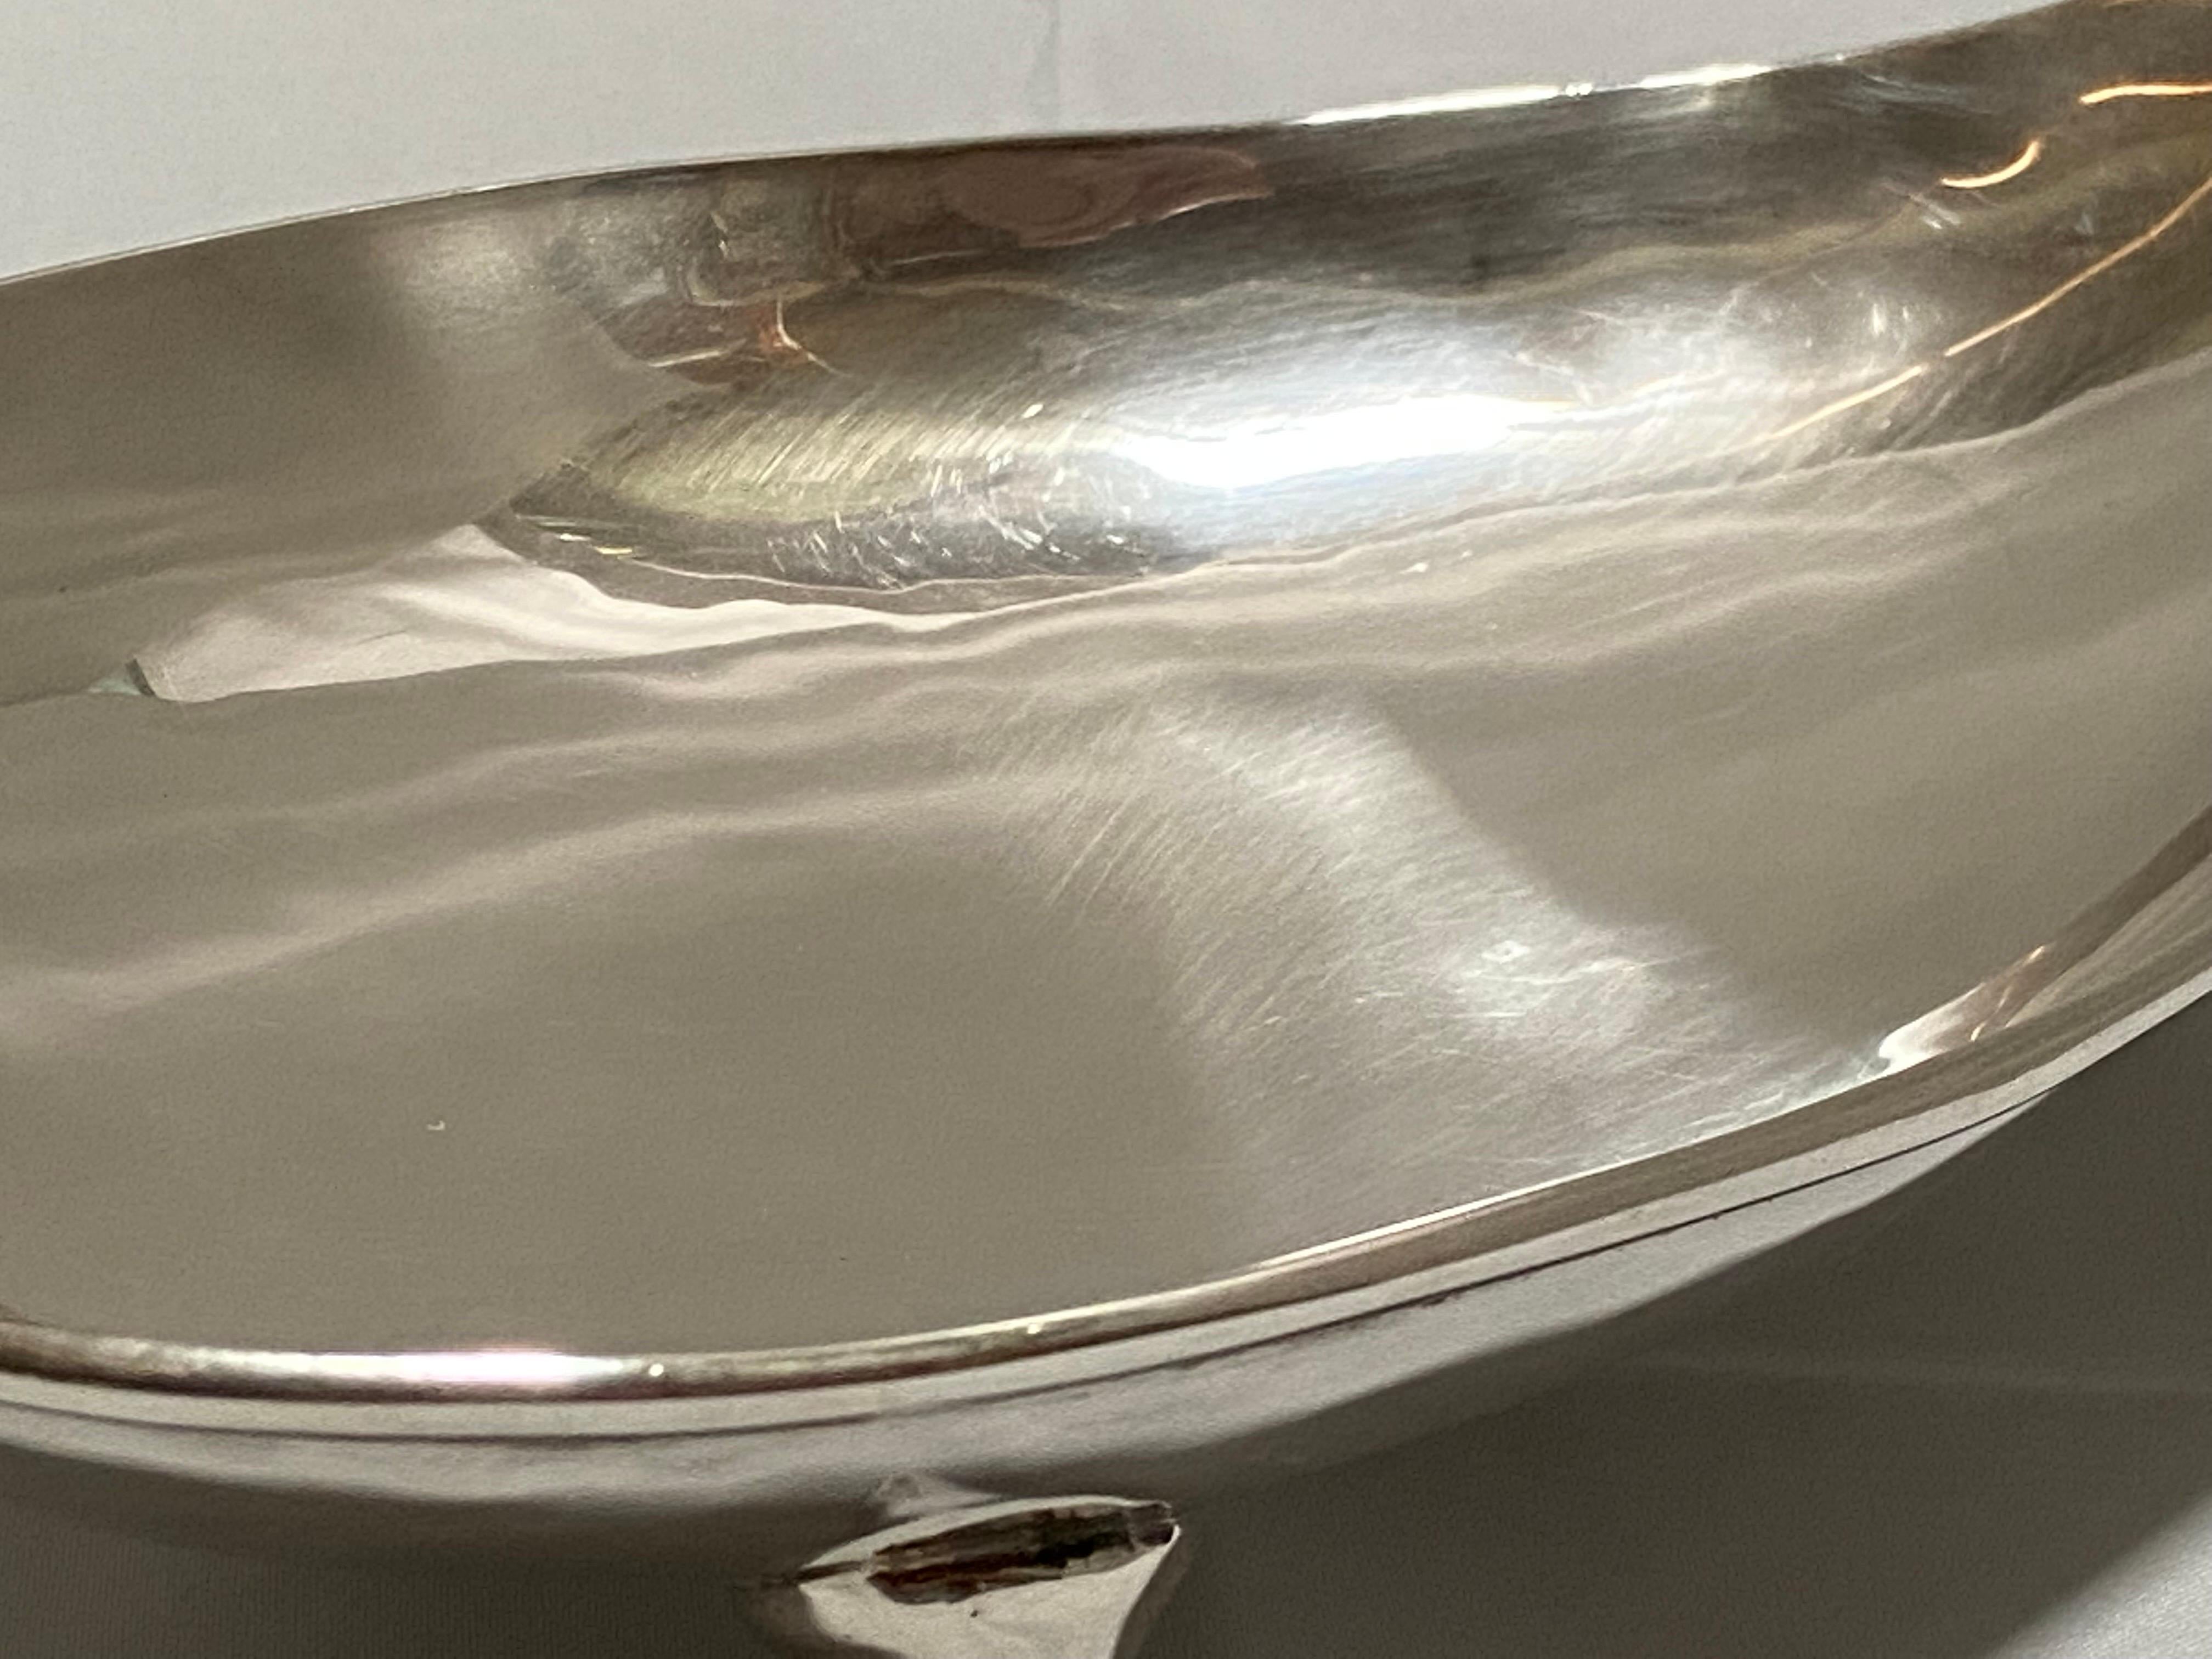 Vintage Mexican Mid-Century Modern Sterling Silver Footed Bowl or Dish by Zurita For Sale 6